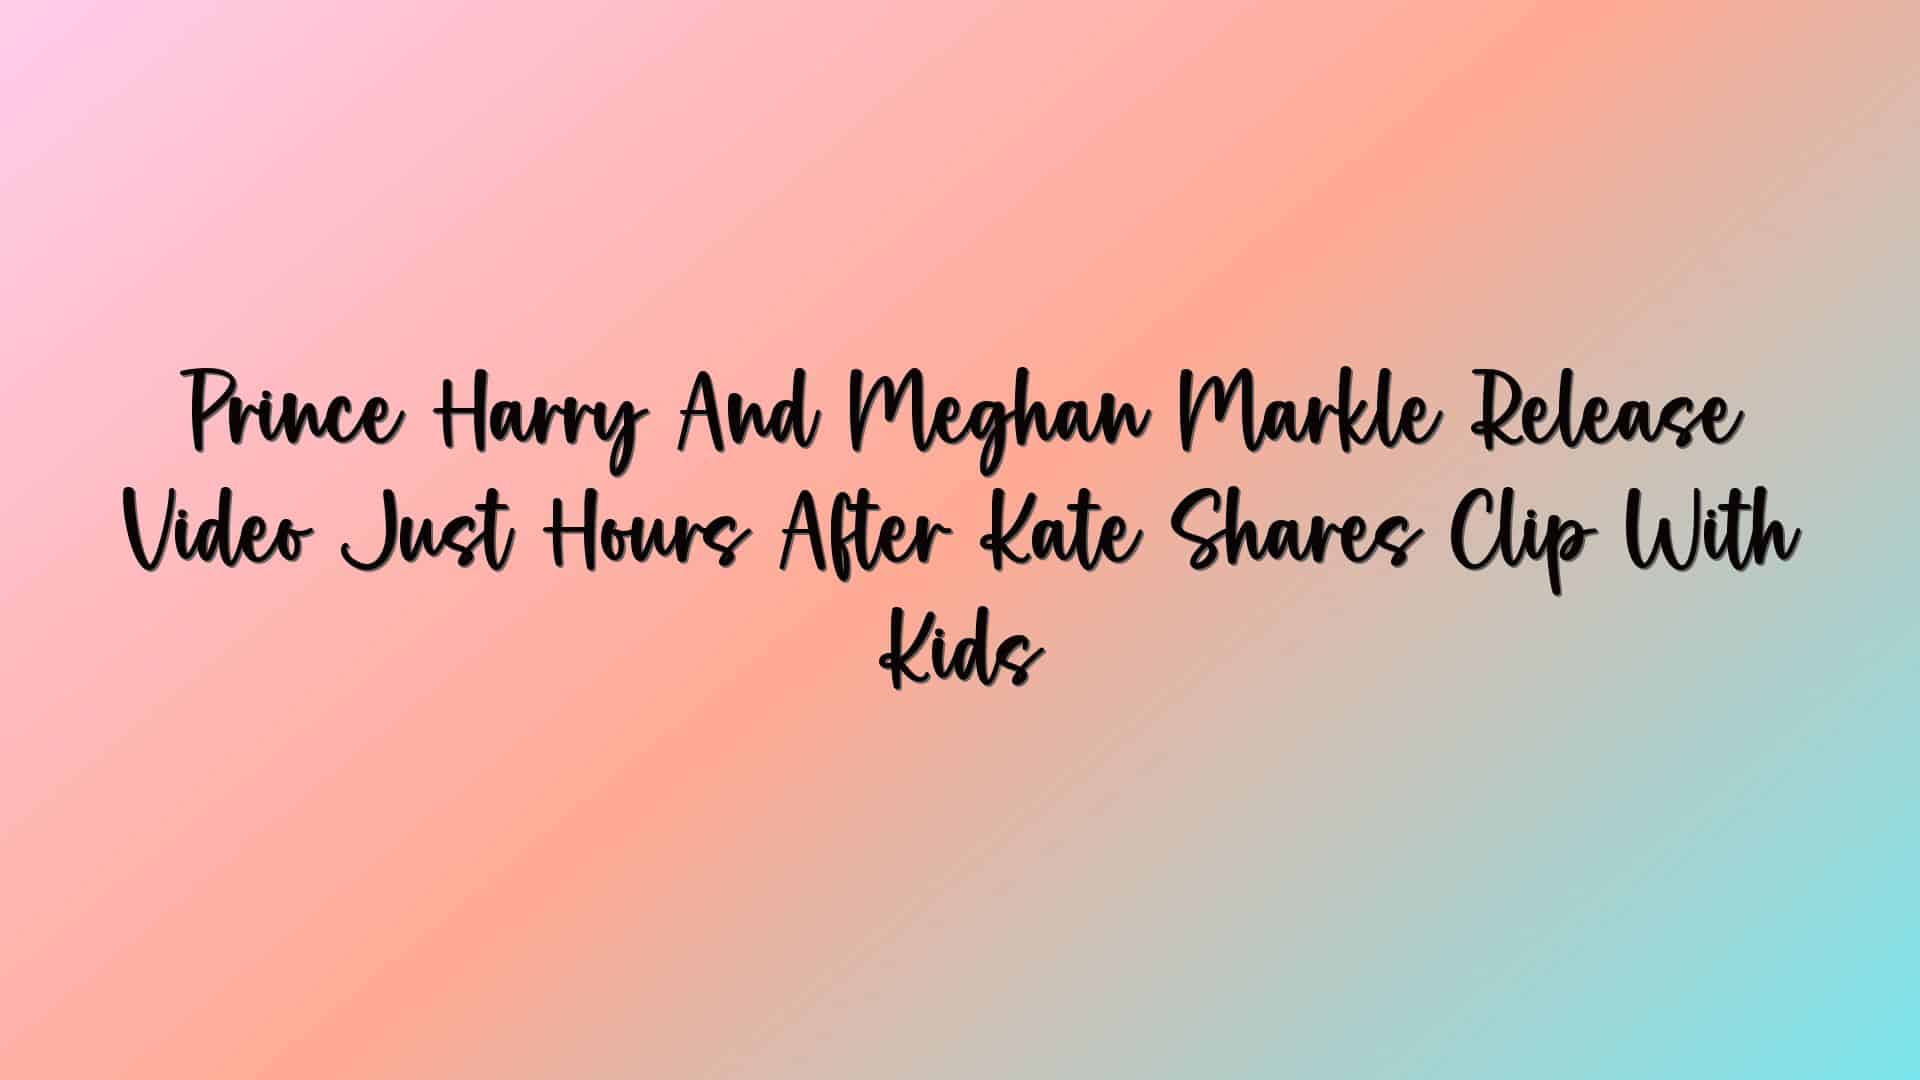 Prince Harry And Meghan Markle Release Video Just Hours After Kate Shares Clip With Kids